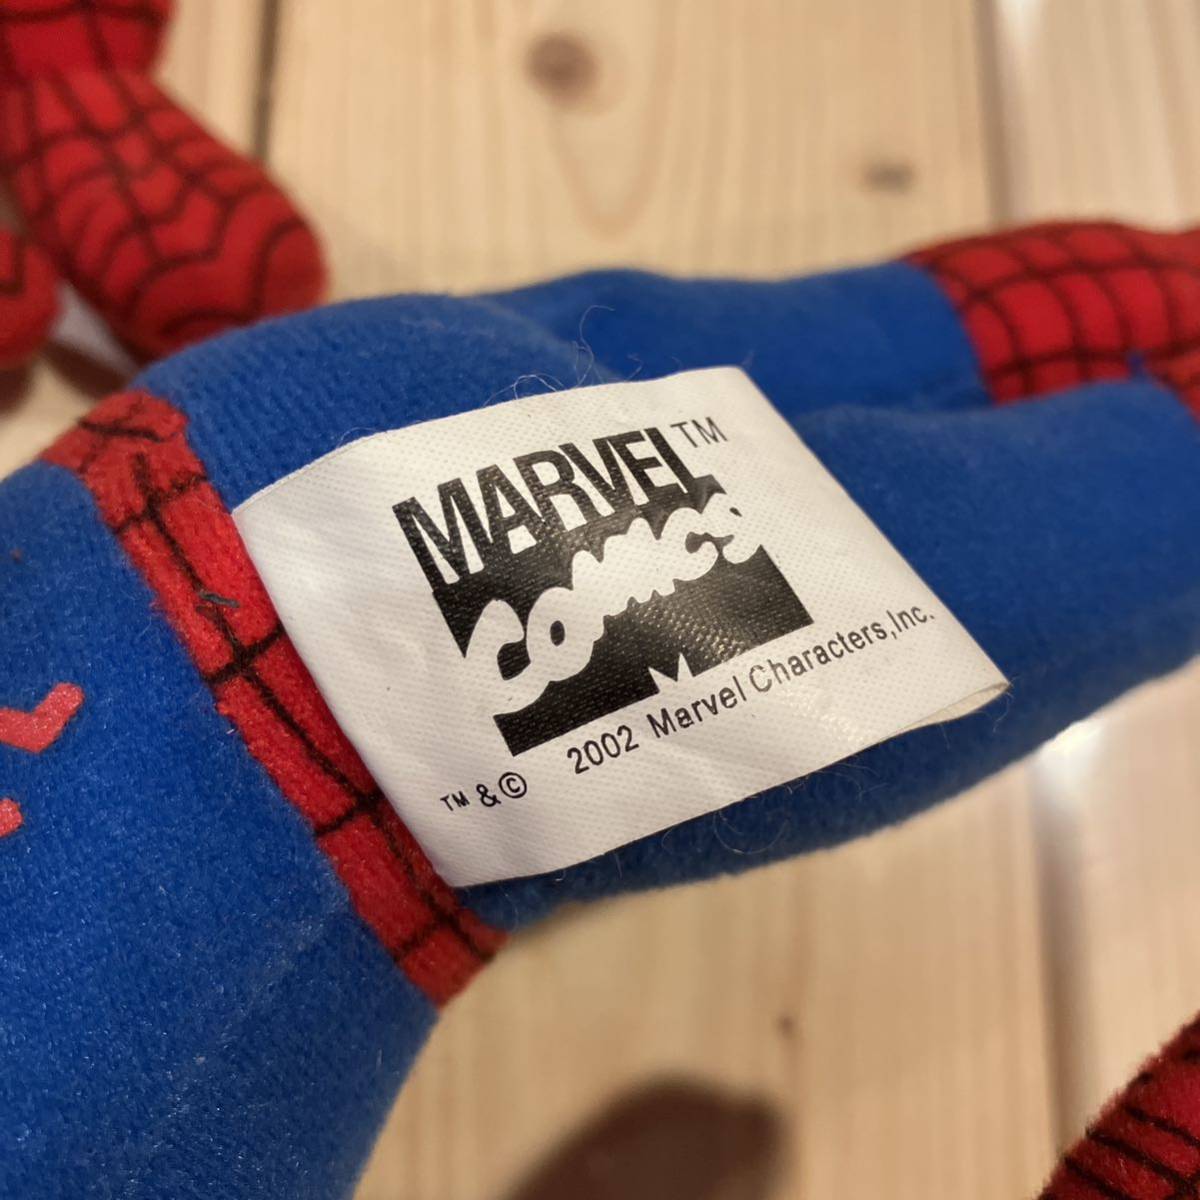  Spider-Man .. lowering interior soft toy 4 body omo tea figure Vintage Vintage import miscellaneous goods American Comics Ame toy 